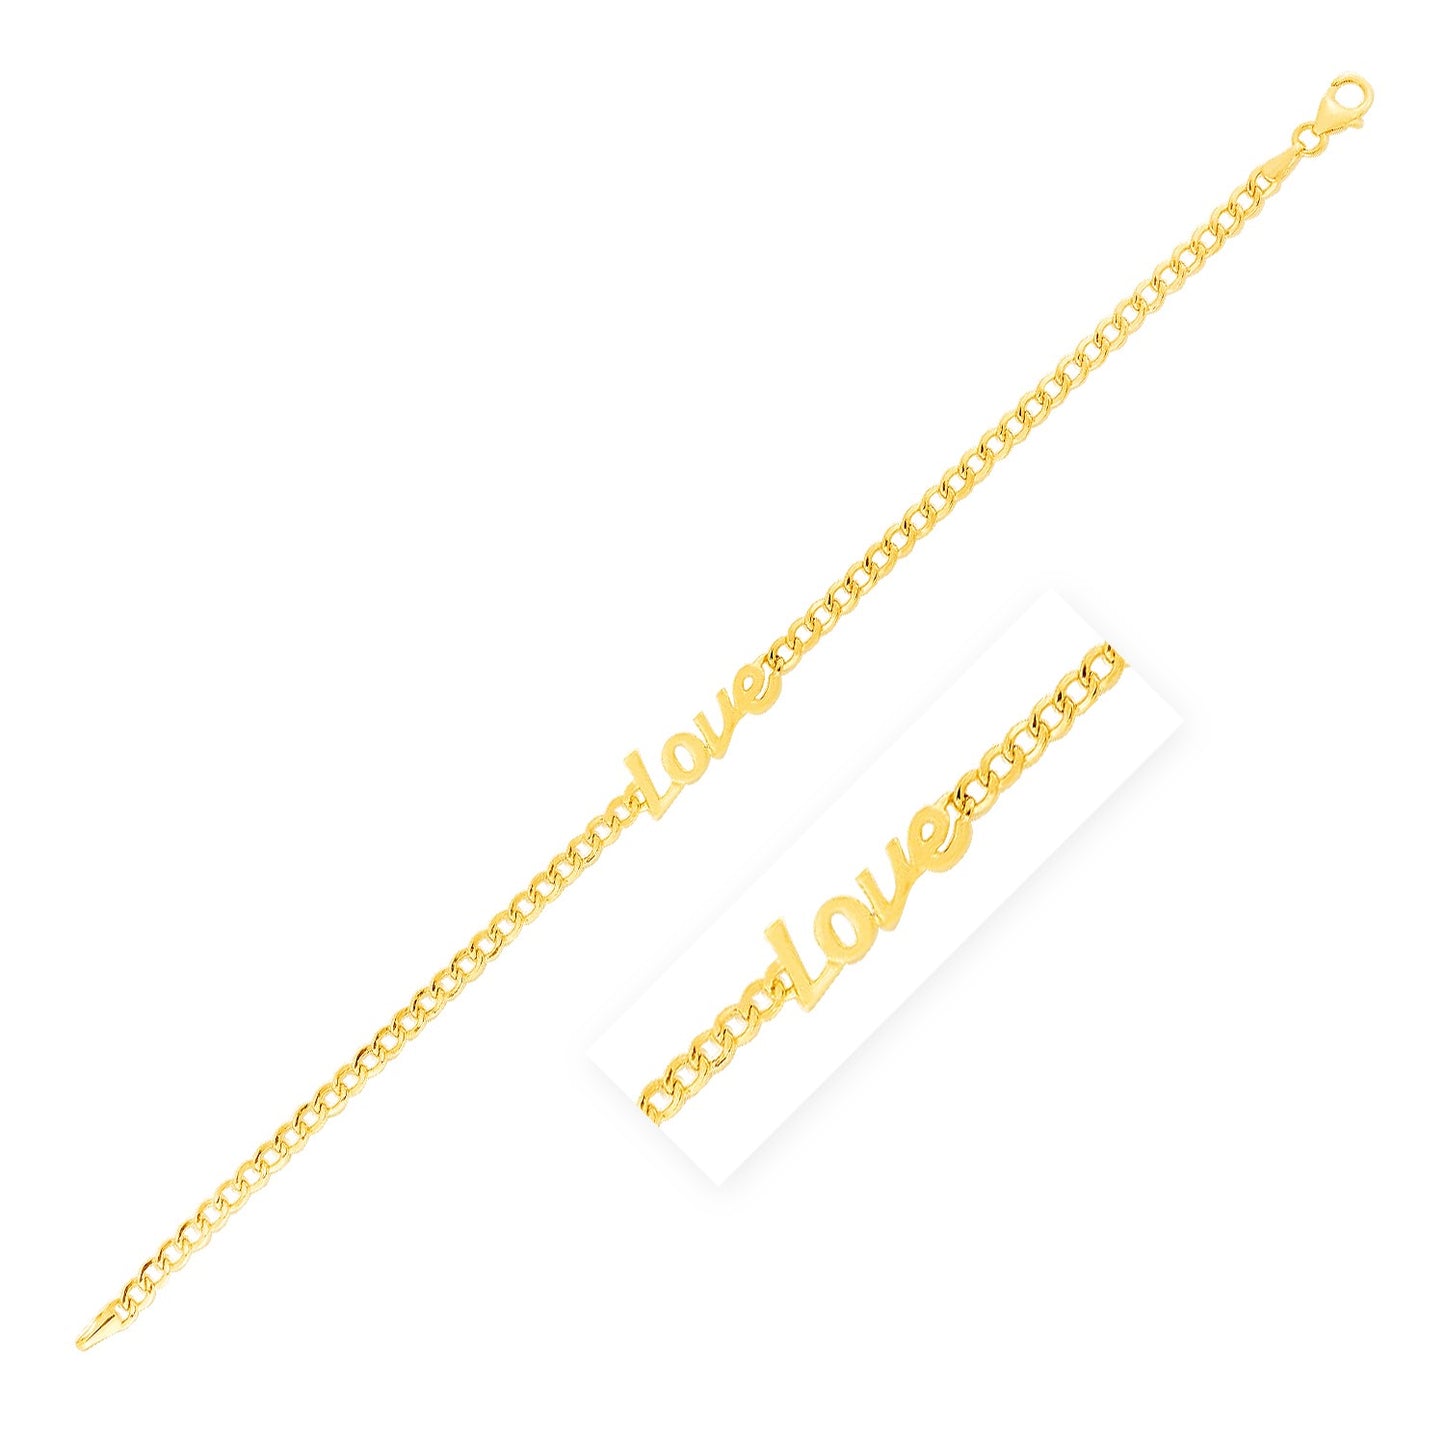 14k Yellow Gold 7 inch Curb Chain Love Bracelet